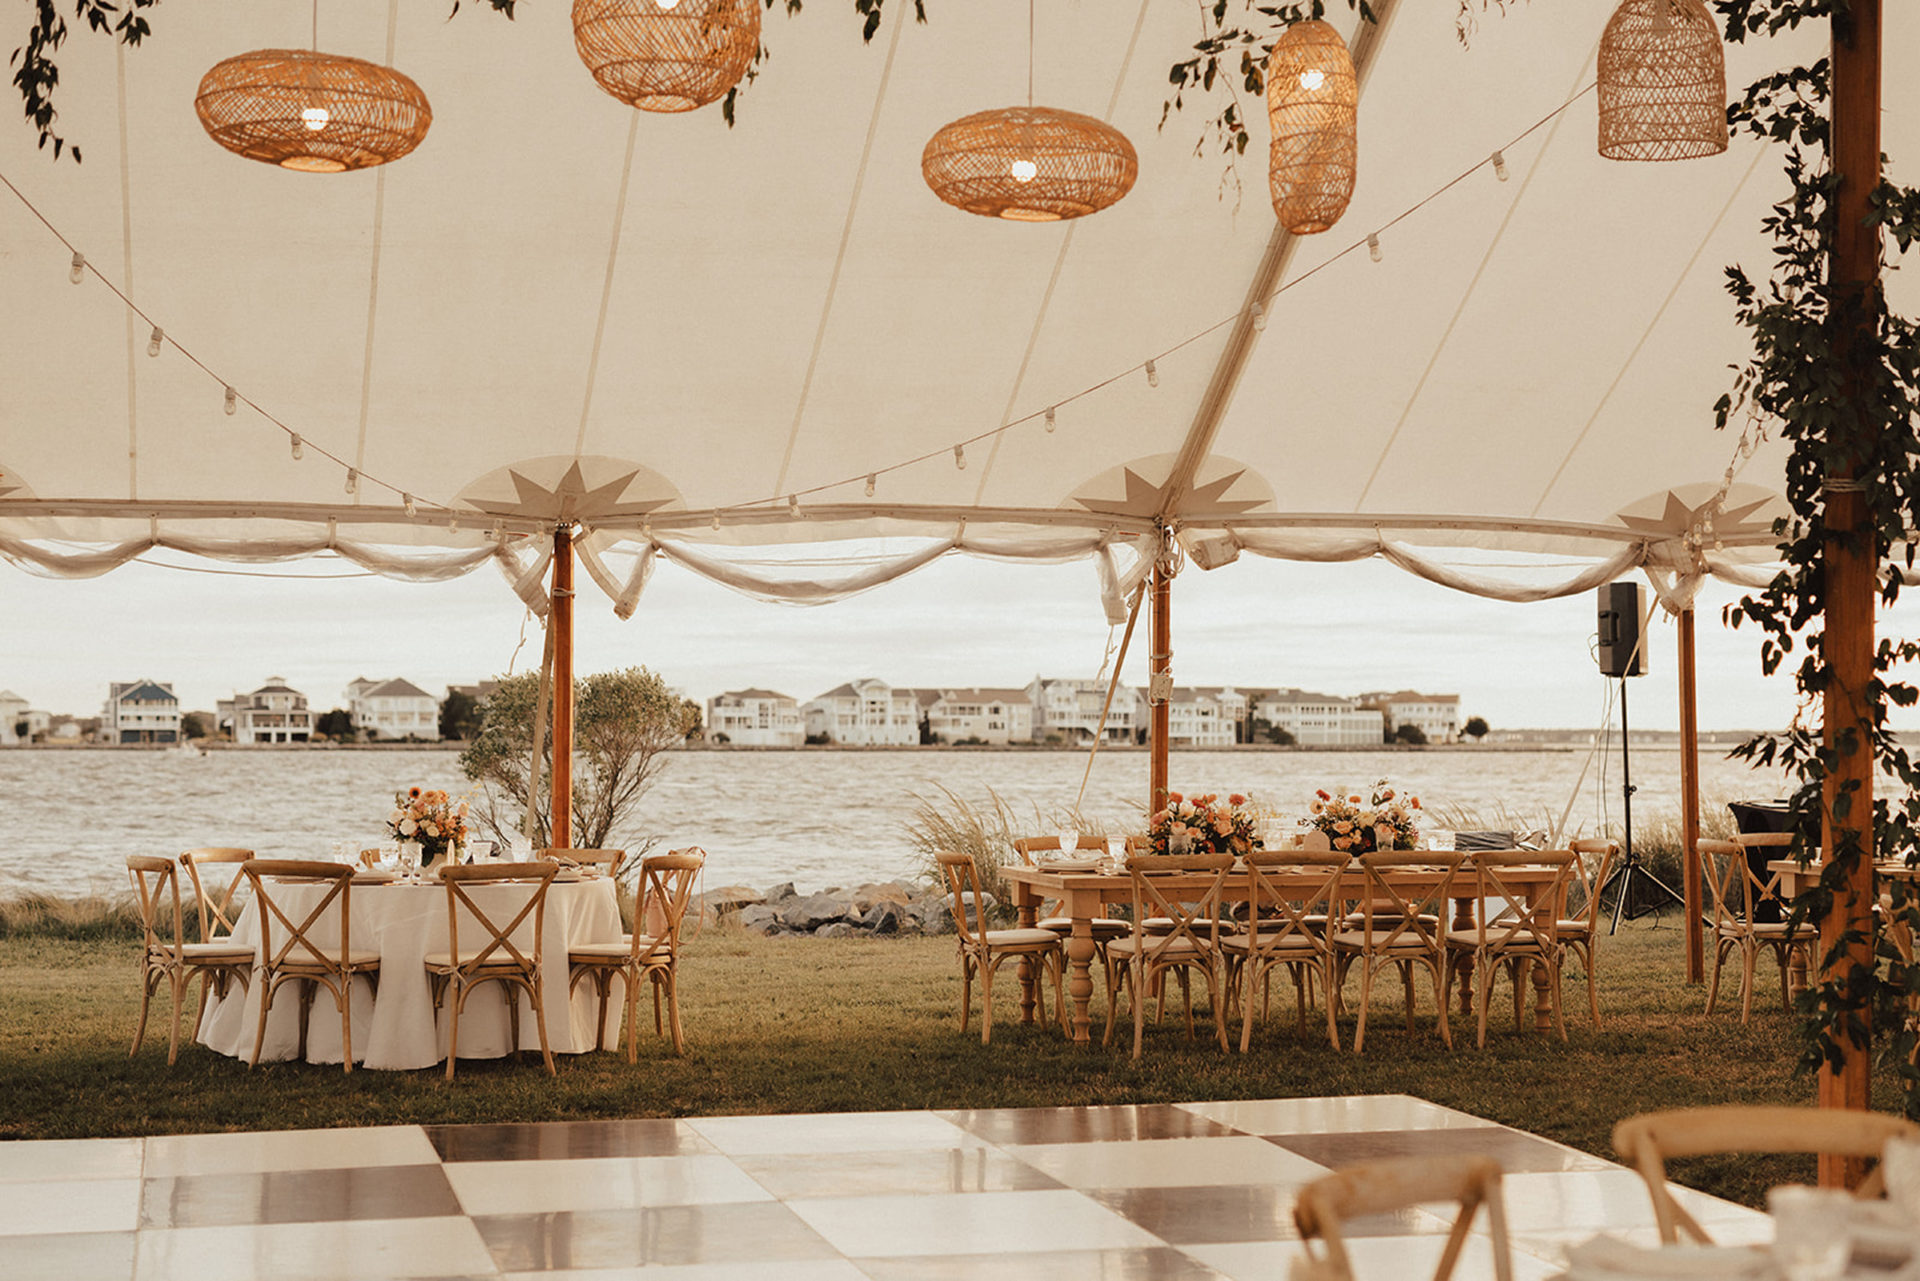 Large white tent for wedding reception